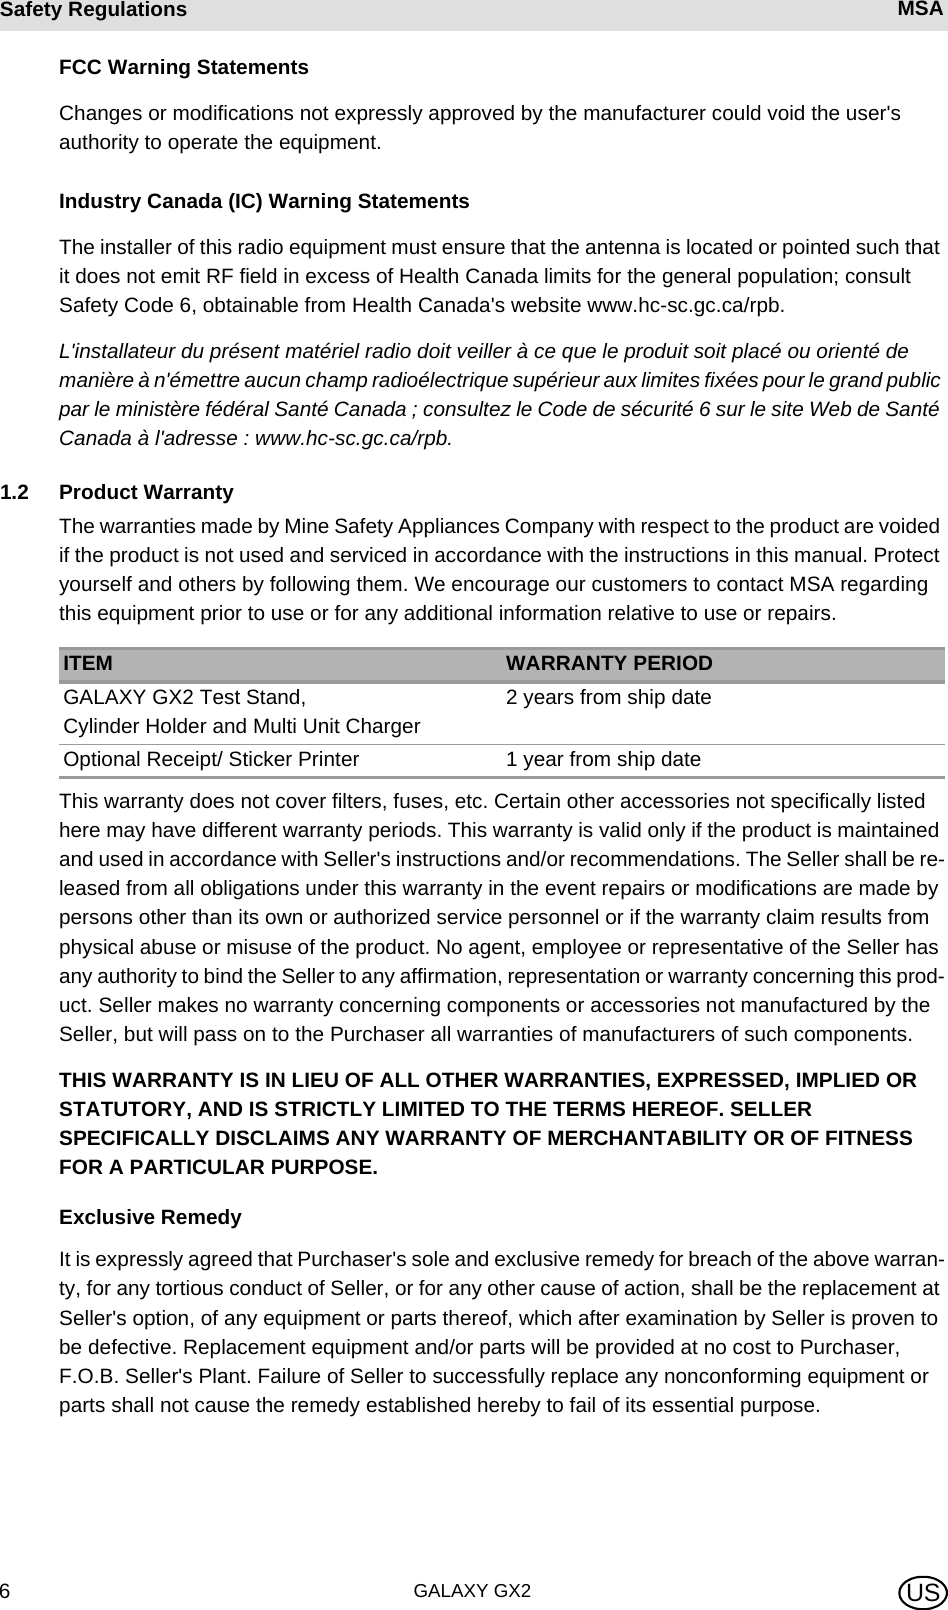 GALAXY GX26Safety Regulations MSA USFCC Warning StatementsChanges or modifications not expressly approved by the manufacturer could void the user&apos;s authority to operate the equipment.Industry Canada (IC) Warning StatementsThe installer of this radio equipment must ensure that the antenna is located or pointed such that it does not emit RF field in excess of Health Canada limits for the general population; consult Safety Code 6, obtainable from Health Canada&apos;s website www.hc-sc.gc.ca/rpb.L&apos;installateur du présent matériel radio doit veiller à ce que le produit soit placé ou orienté de manière à n&apos;émettre aucun champ radioélectrique supérieur aux limites fixées pour le grand public par le ministère fédéral Santé Canada ; consultez le Code de sécurité 6 sur le site Web de Santé Canada à l&apos;adresse : www.hc-sc.gc.ca/rpb.1.2 Product WarrantyThe warranties made by Mine Safety Appliances Company with respect to the product are voided if the product is not used and serviced in accordance with the instructions in this manual. Protect yourself and others by following them. We encourage our customers to contact MSA regarding this equipment prior to use or for any additional information relative to use or repairs.This warranty does not cover filters, fuses, etc. Certain other accessories not specifically listed here may have different warranty periods. This warranty is valid only if the product is maintained and used in accordance with Seller&apos;s instructions and/or recommendations. The Seller shall be re-leased from all obligations under this warranty in the event repairs or modifications are made by persons other than its own or authorized service personnel or if the warranty claim results from physical abuse or misuse of the product. No agent, employee or representative of the Seller has any authority to bind the Seller to any affirmation, representation or warranty concerning this prod-uct. Seller makes no warranty concerning components or accessories not manufactured by the Seller, but will pass on to the Purchaser all warranties of manufacturers of such components. THIS WARRANTY IS IN LIEU OF ALL OTHER WARRANTIES, EXPRESSED, IMPLIED OR STATUTORY, AND IS STRICTLY LIMITED TO THE TERMS HEREOF. SELLER SPECIFICALLY DISCLAIMS ANY WARRANTY OF MERCHANTABILITY OR OF FITNESS FOR A PARTICULAR PURPOSE. Exclusive RemedyIt is expressly agreed that Purchaser&apos;s sole and exclusive remedy for breach of the above warran-ty, for any tortious conduct of Seller, or for any other cause of action, shall be the replacement at Seller&apos;s option, of any equipment or parts thereof, which after examination by Seller is proven to be defective. Replacement equipment and/or parts will be provided at no cost to Purchaser, F.O.B. Seller&apos;s Plant. Failure of Seller to successfully replace any nonconforming equipment or parts shall not cause the remedy established hereby to fail of its essential purpose. ITEM WARRANTY PERIODGALAXY GX2 Test Stand,  Cylinder Holder and Multi Unit Charger2 years from ship dateOptional Receipt/ Sticker Printer 1 year from ship date